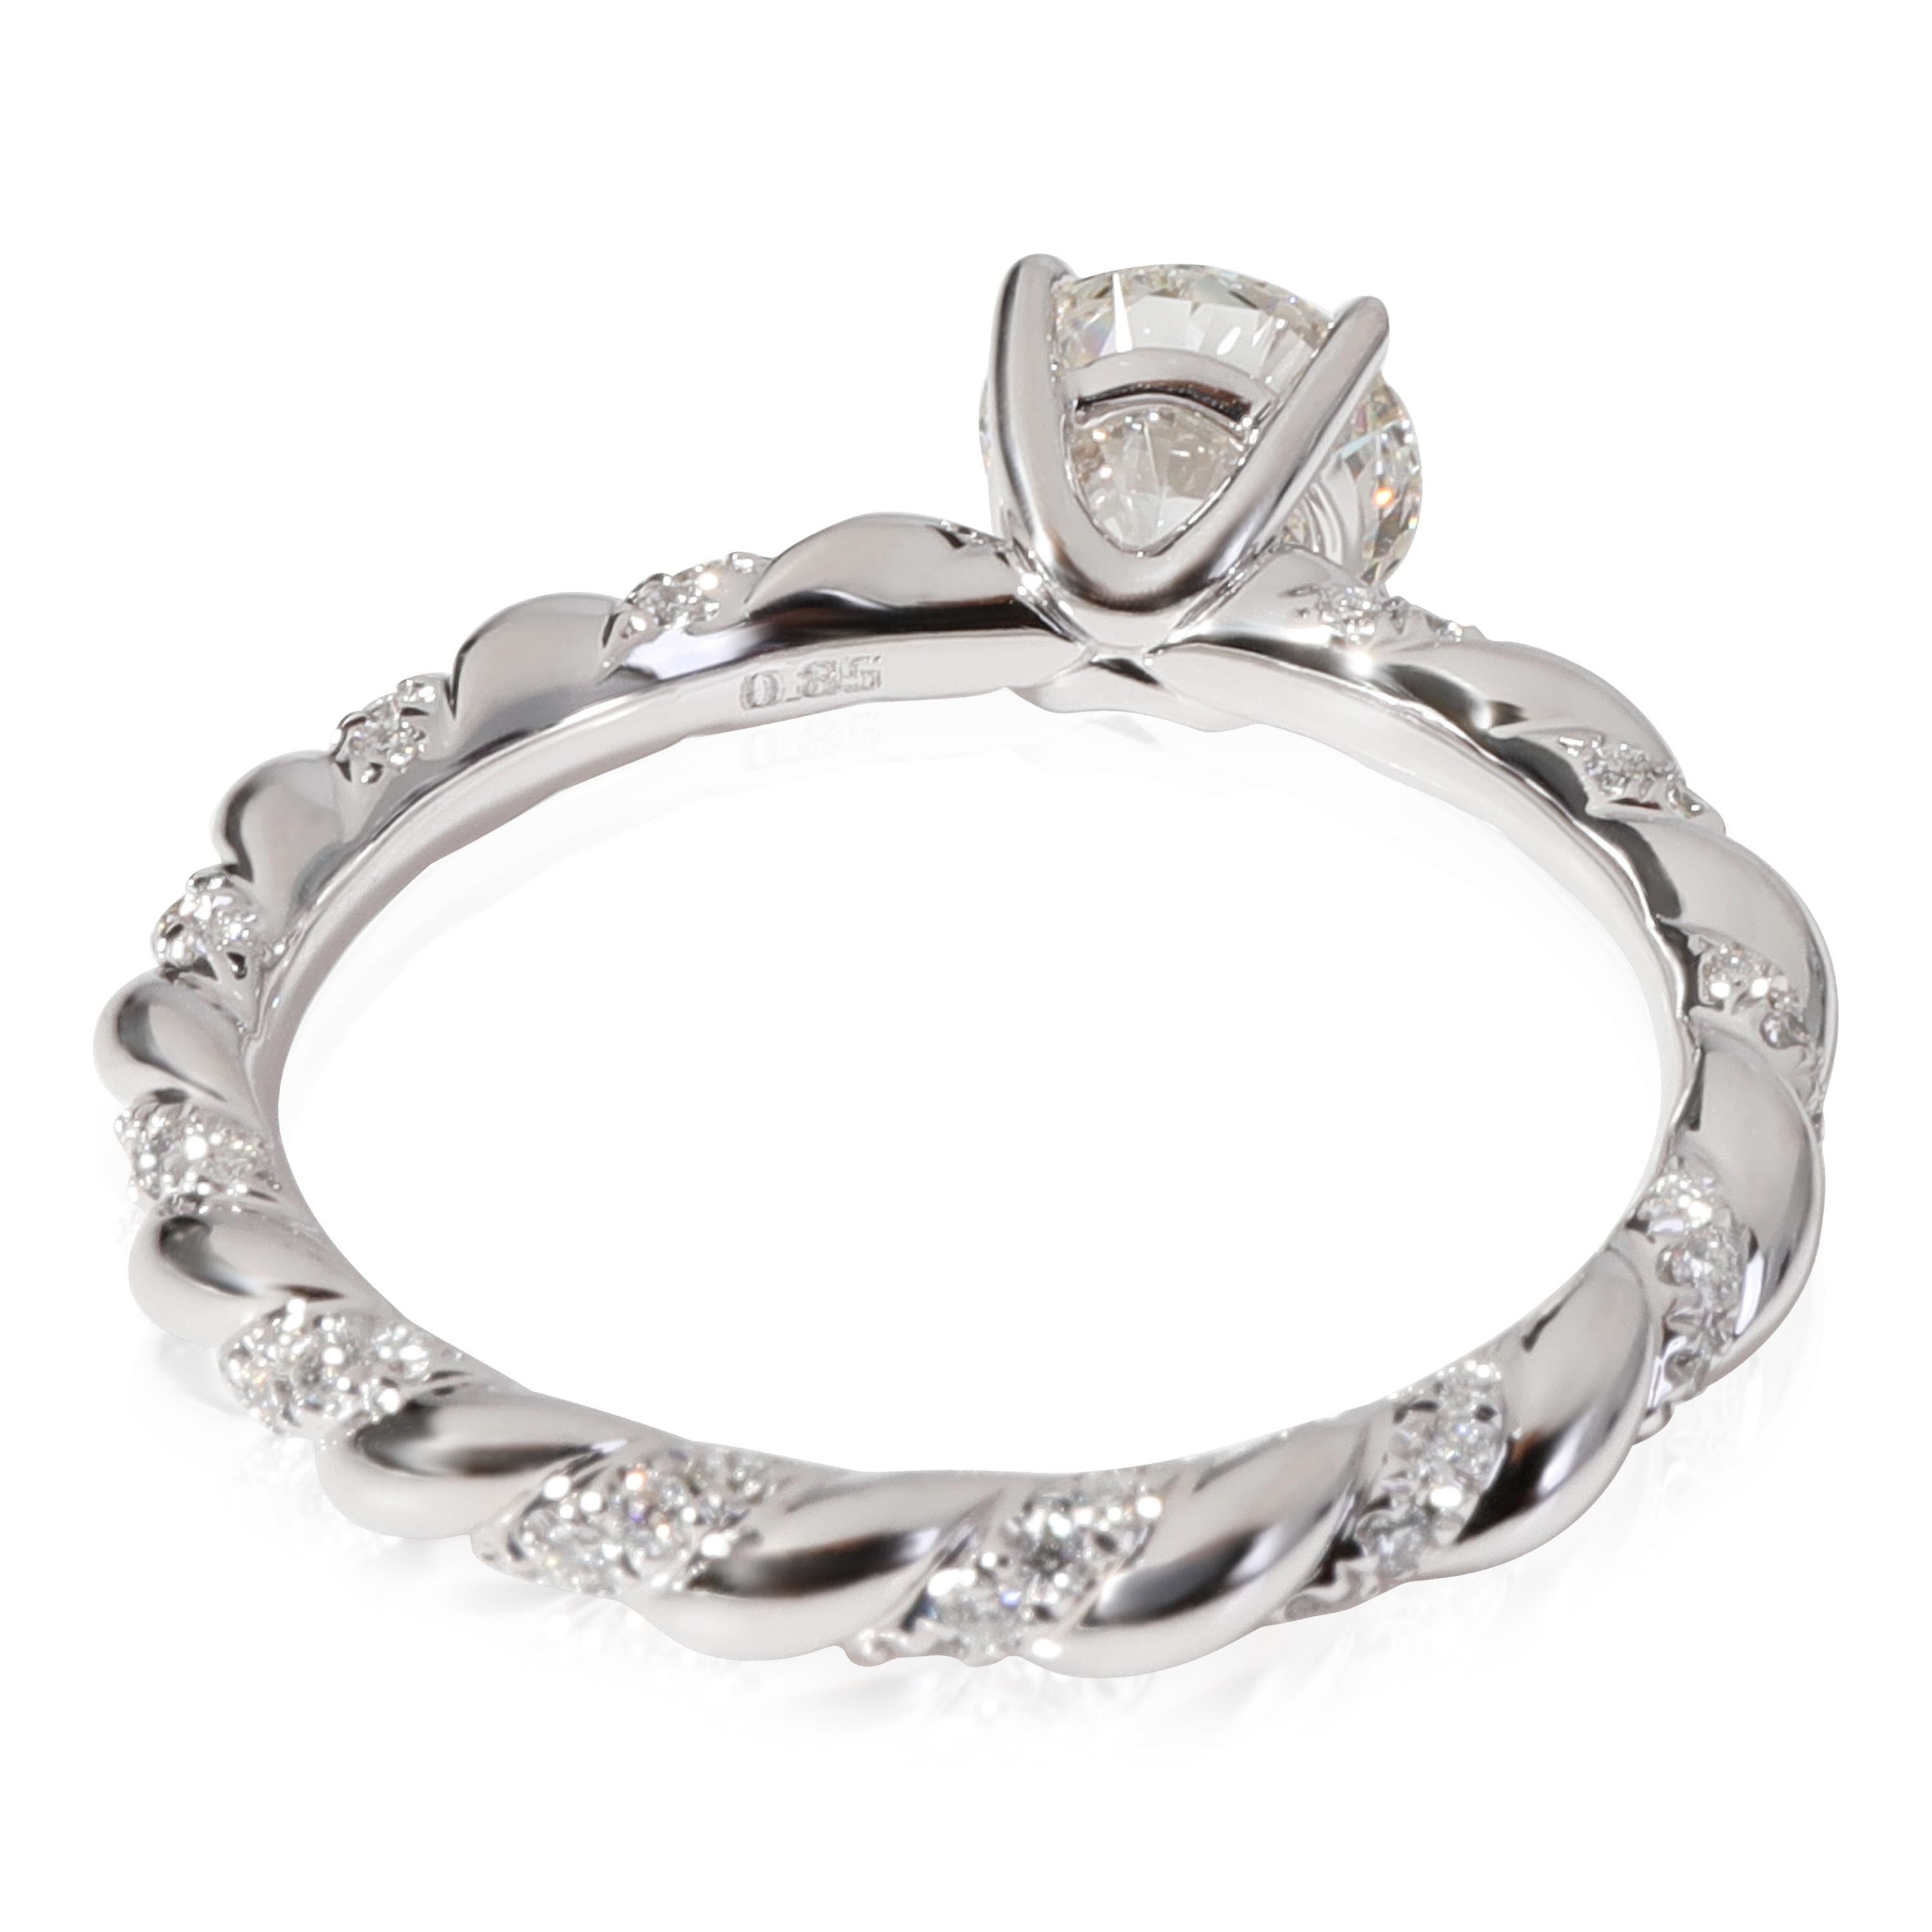 David Yurman Unity Collection Diamond Engagement Ring in Platinum H VS

PRIMARY DETAILS
SKU: 119205
Listing Title: David Yurman Unity Collection Diamond Engagement Ring in Platinum H VS
Condition Description: Retails for 10050 USD. In excellent